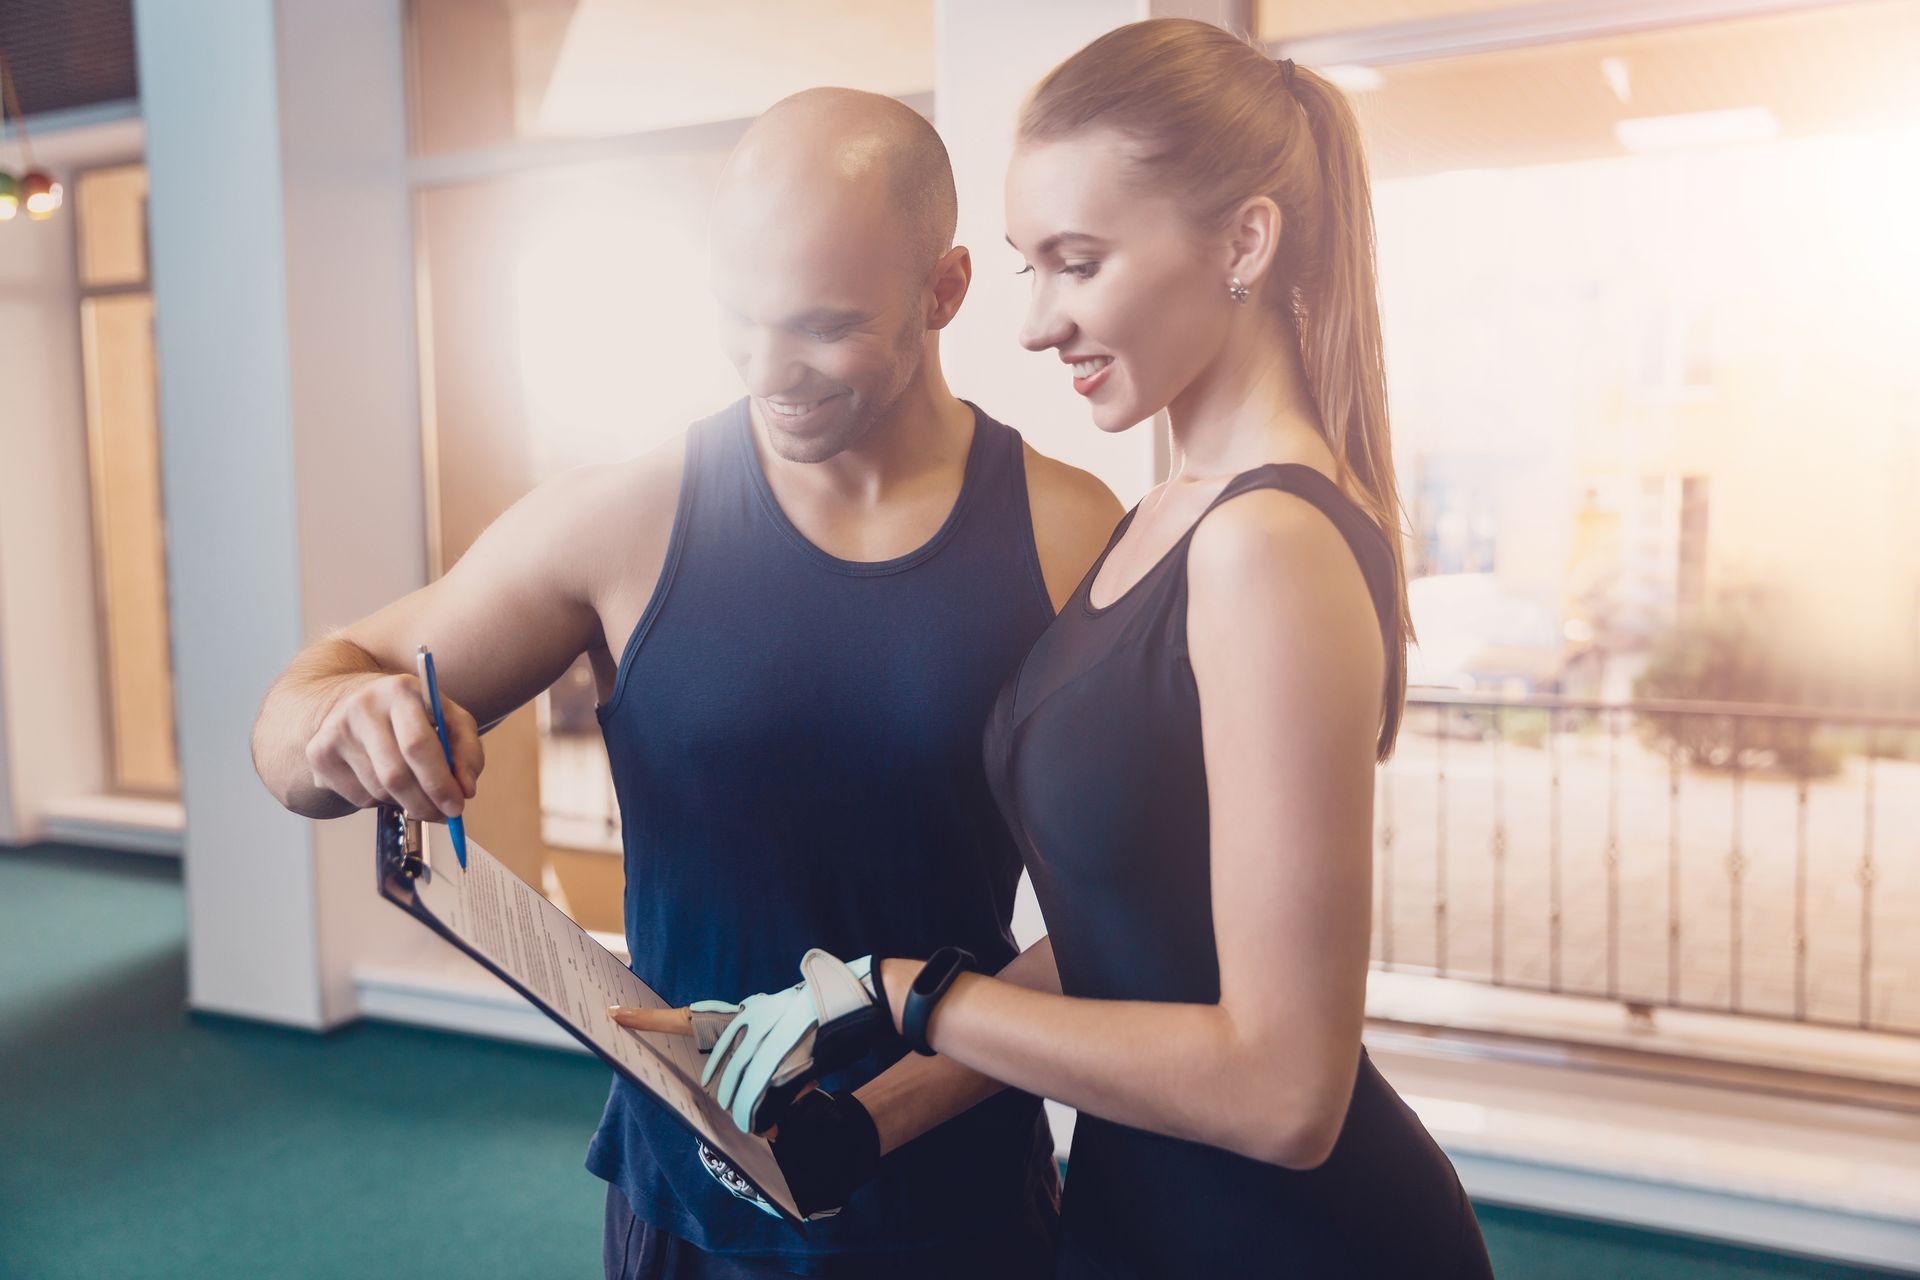 Trainer writes a fitness program training the girl. The program of physical training for effective results when working in the gym. Work on physical labor with an individual trainer in a fitness club.